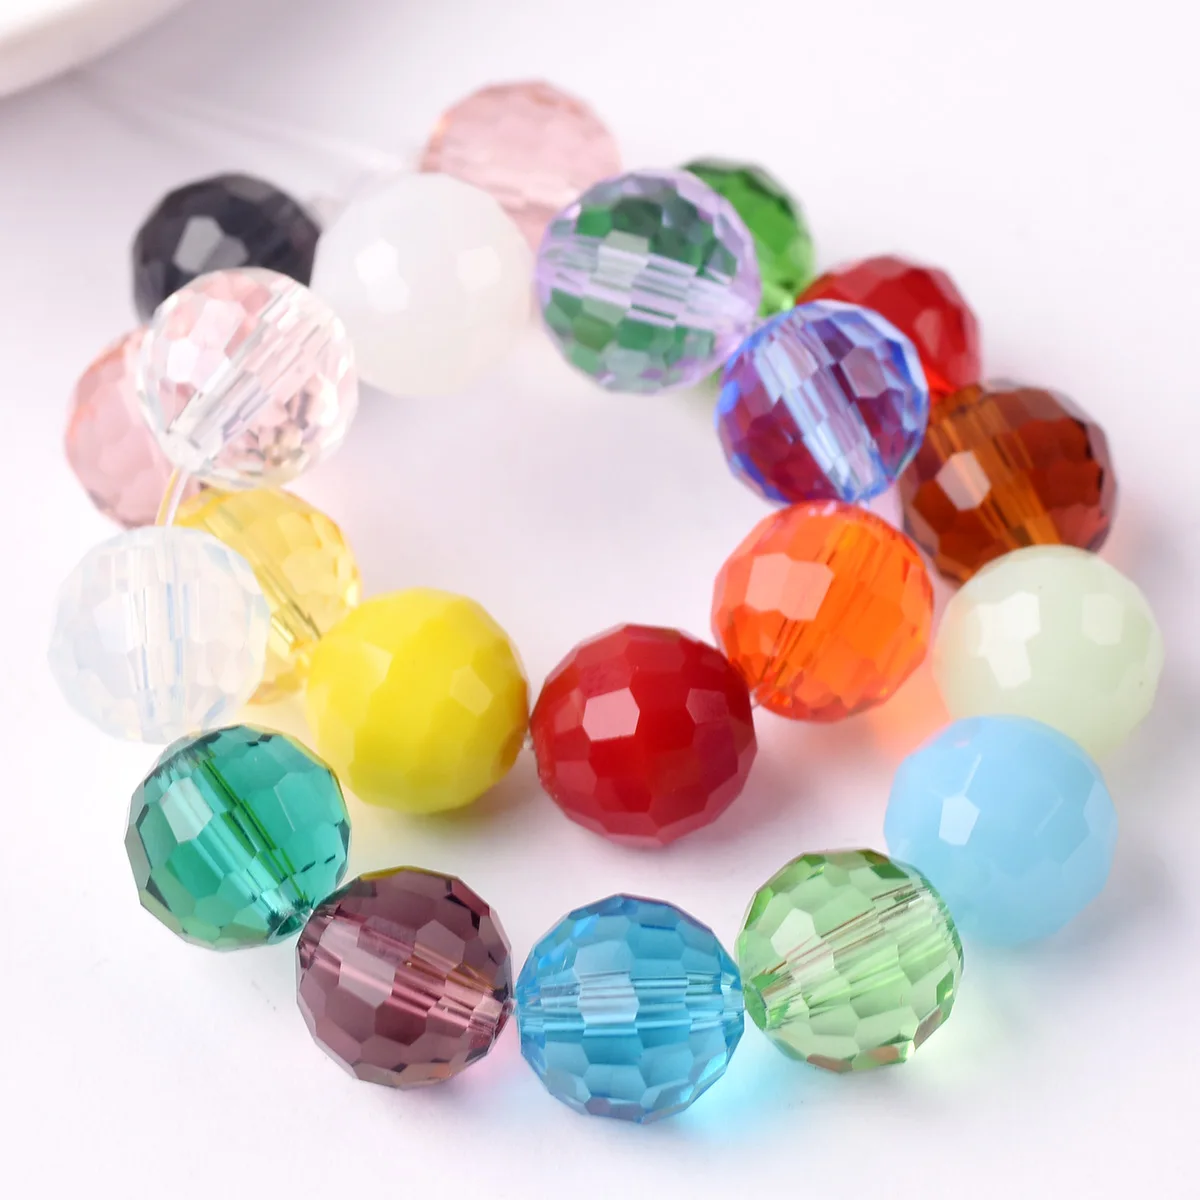 Round 96 Facets 6mm 8mm 10mm 12mm Faceted Crystal Glass Loose Spacer Beads Wholesale Bulk Lot For Jewelry Making Findings 5pcs transparent 27mm austrian element peach heart pendant sun catcher crystal chandelier decor faceted glass prism love beads